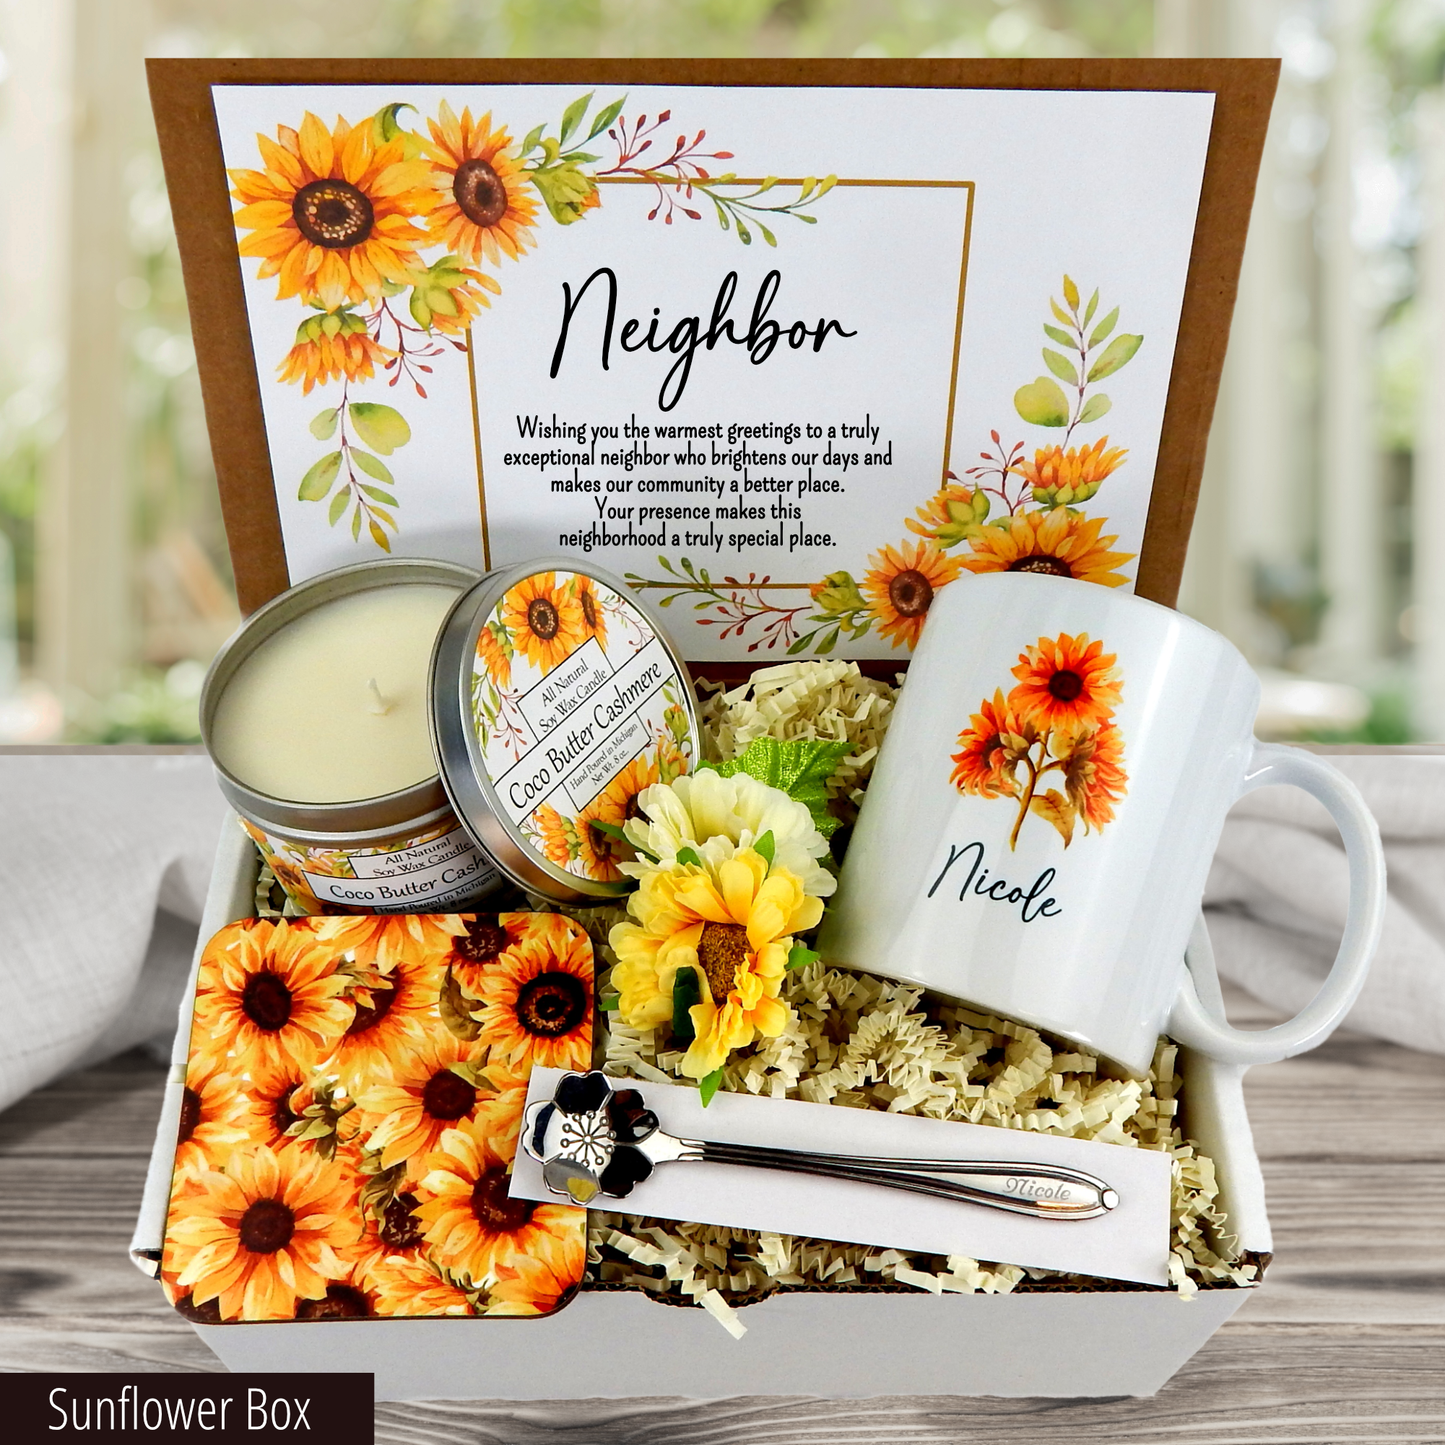 Sunflower themed Customized Mug, Spoon, and Candle in a New Neighbor Gift Basket